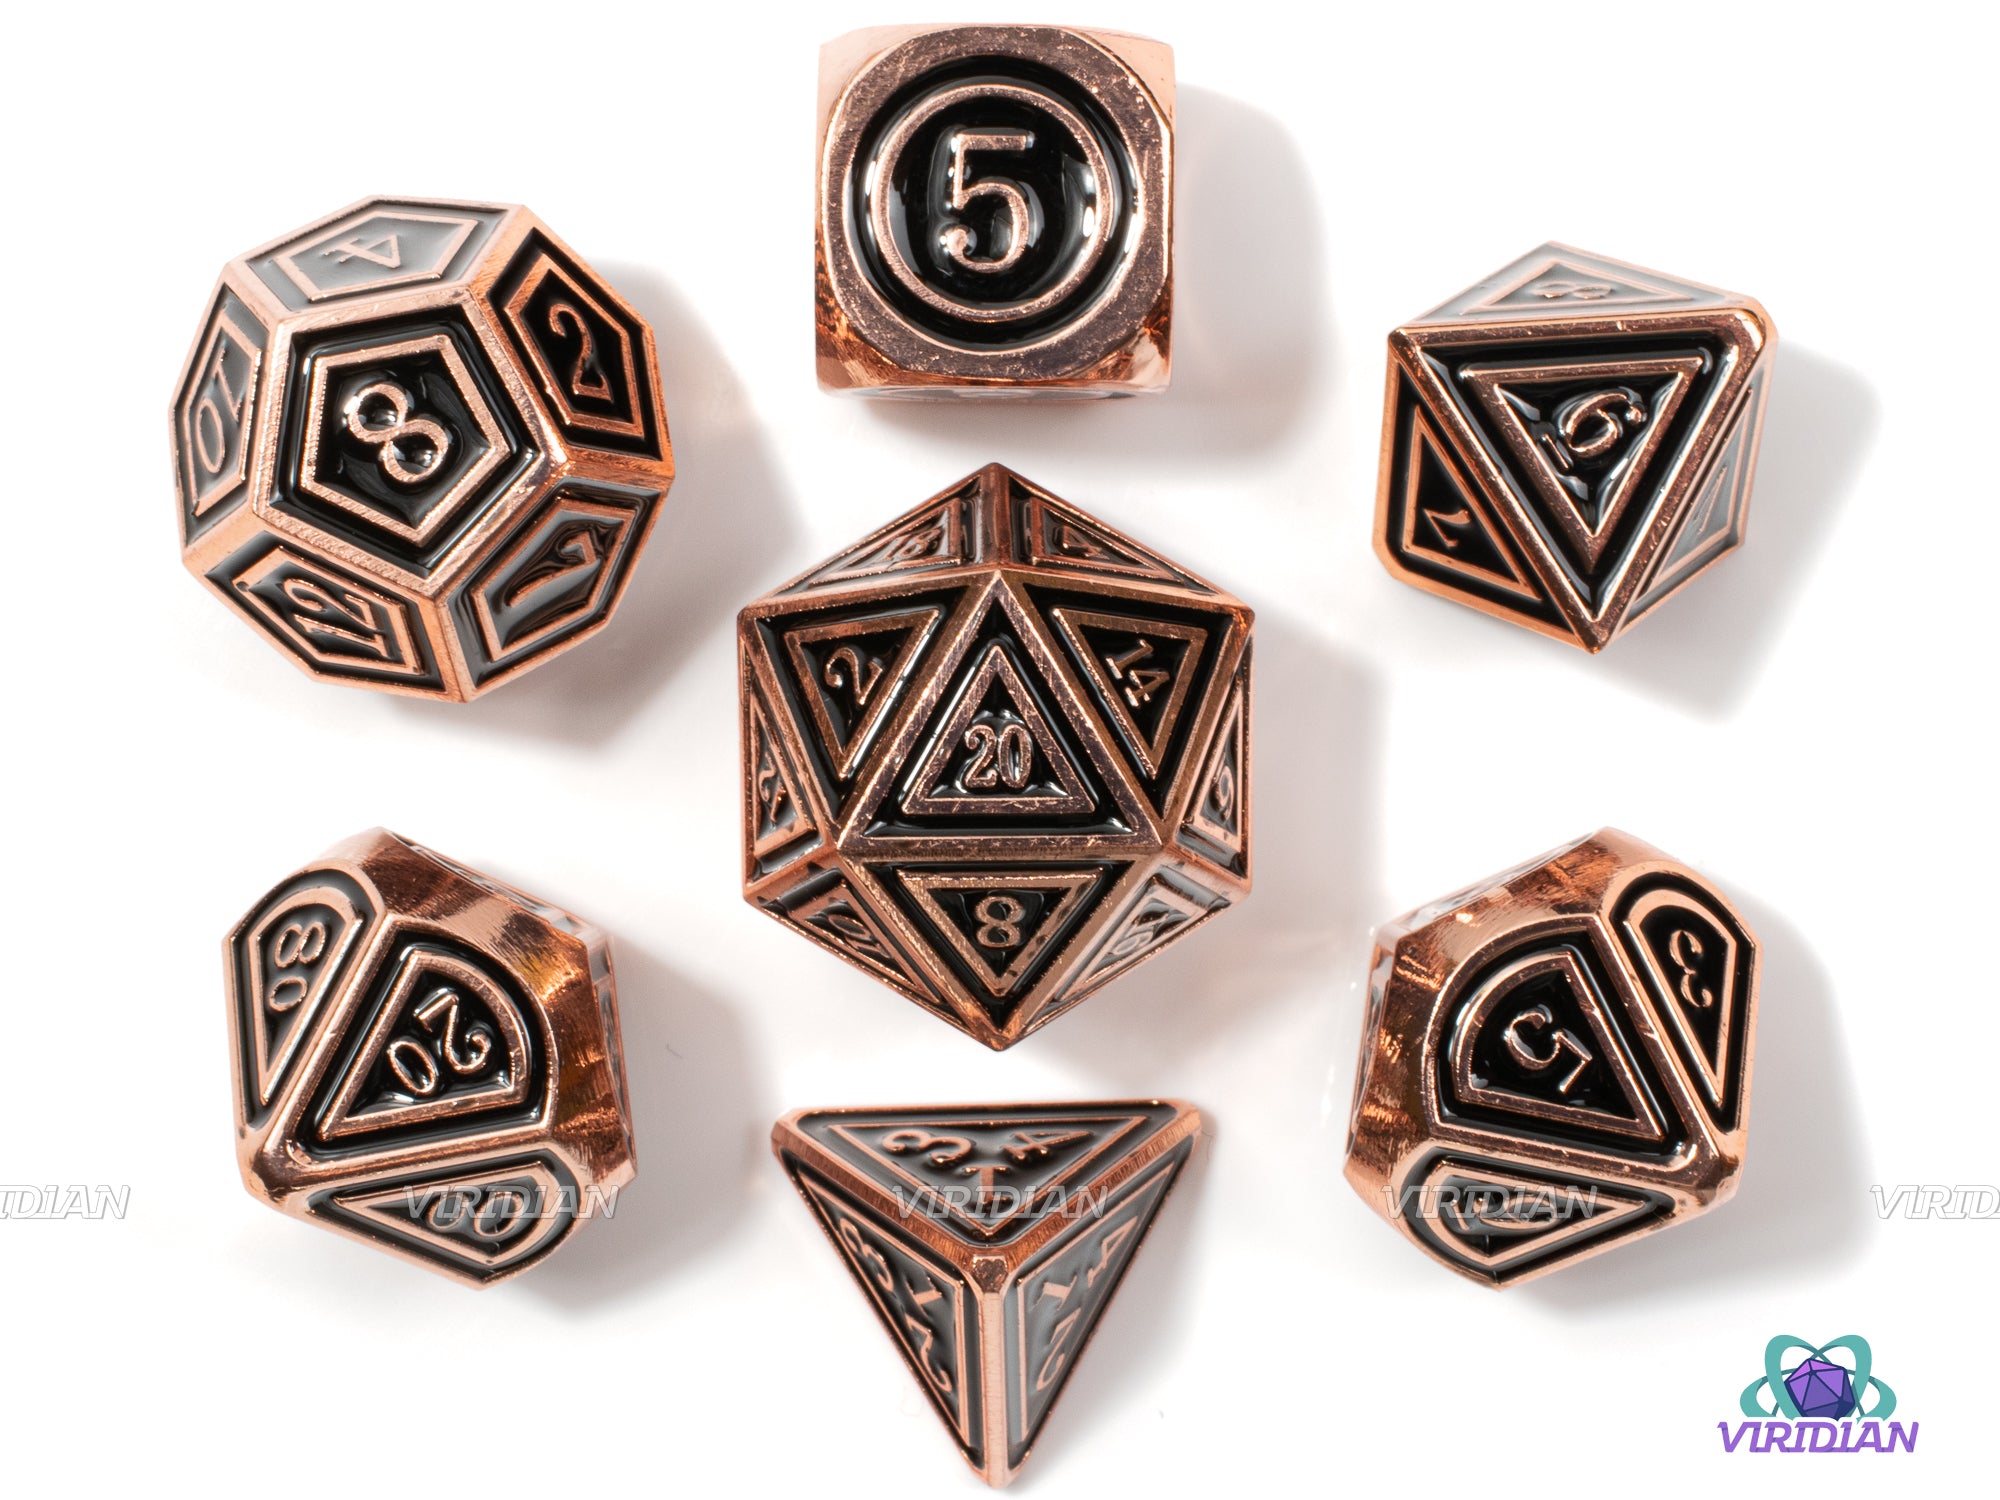 Armor of Darkness | Black Enamel, Copper, Metal Dice Set (7) | Dungeons and Dragons (DnD) | Tabletop RPG Gaming